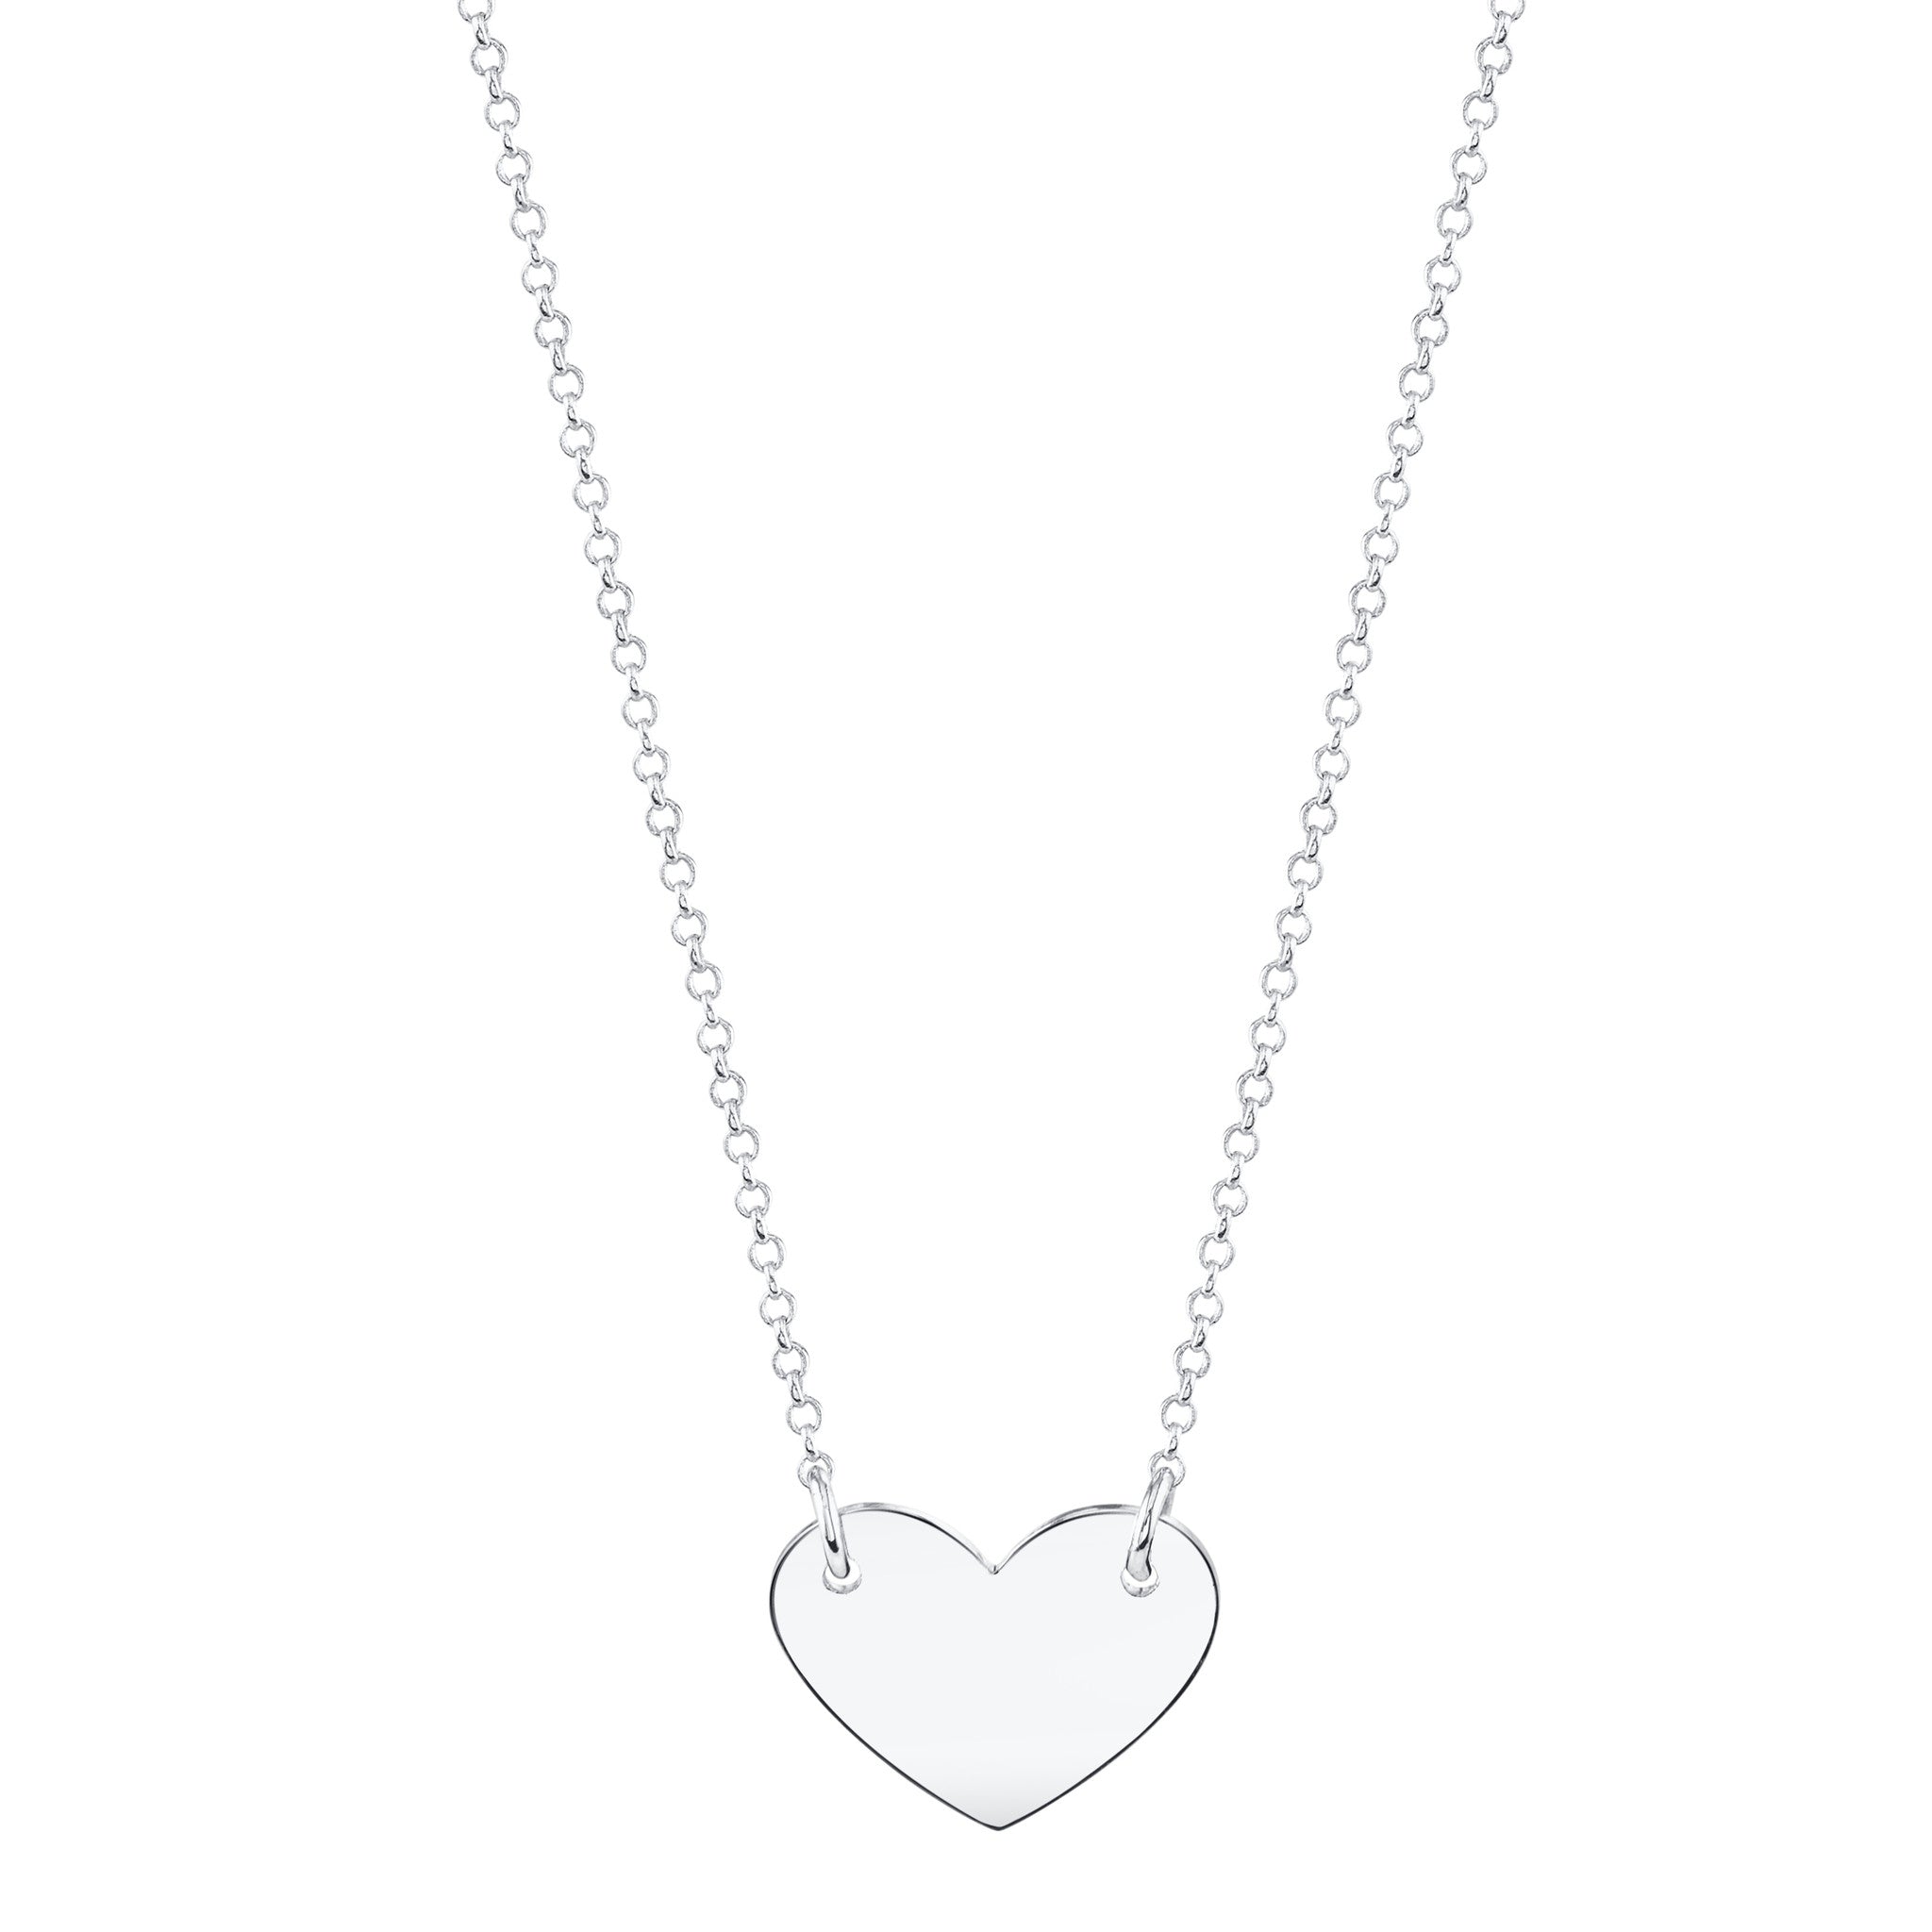 Chubby Heart Necklace